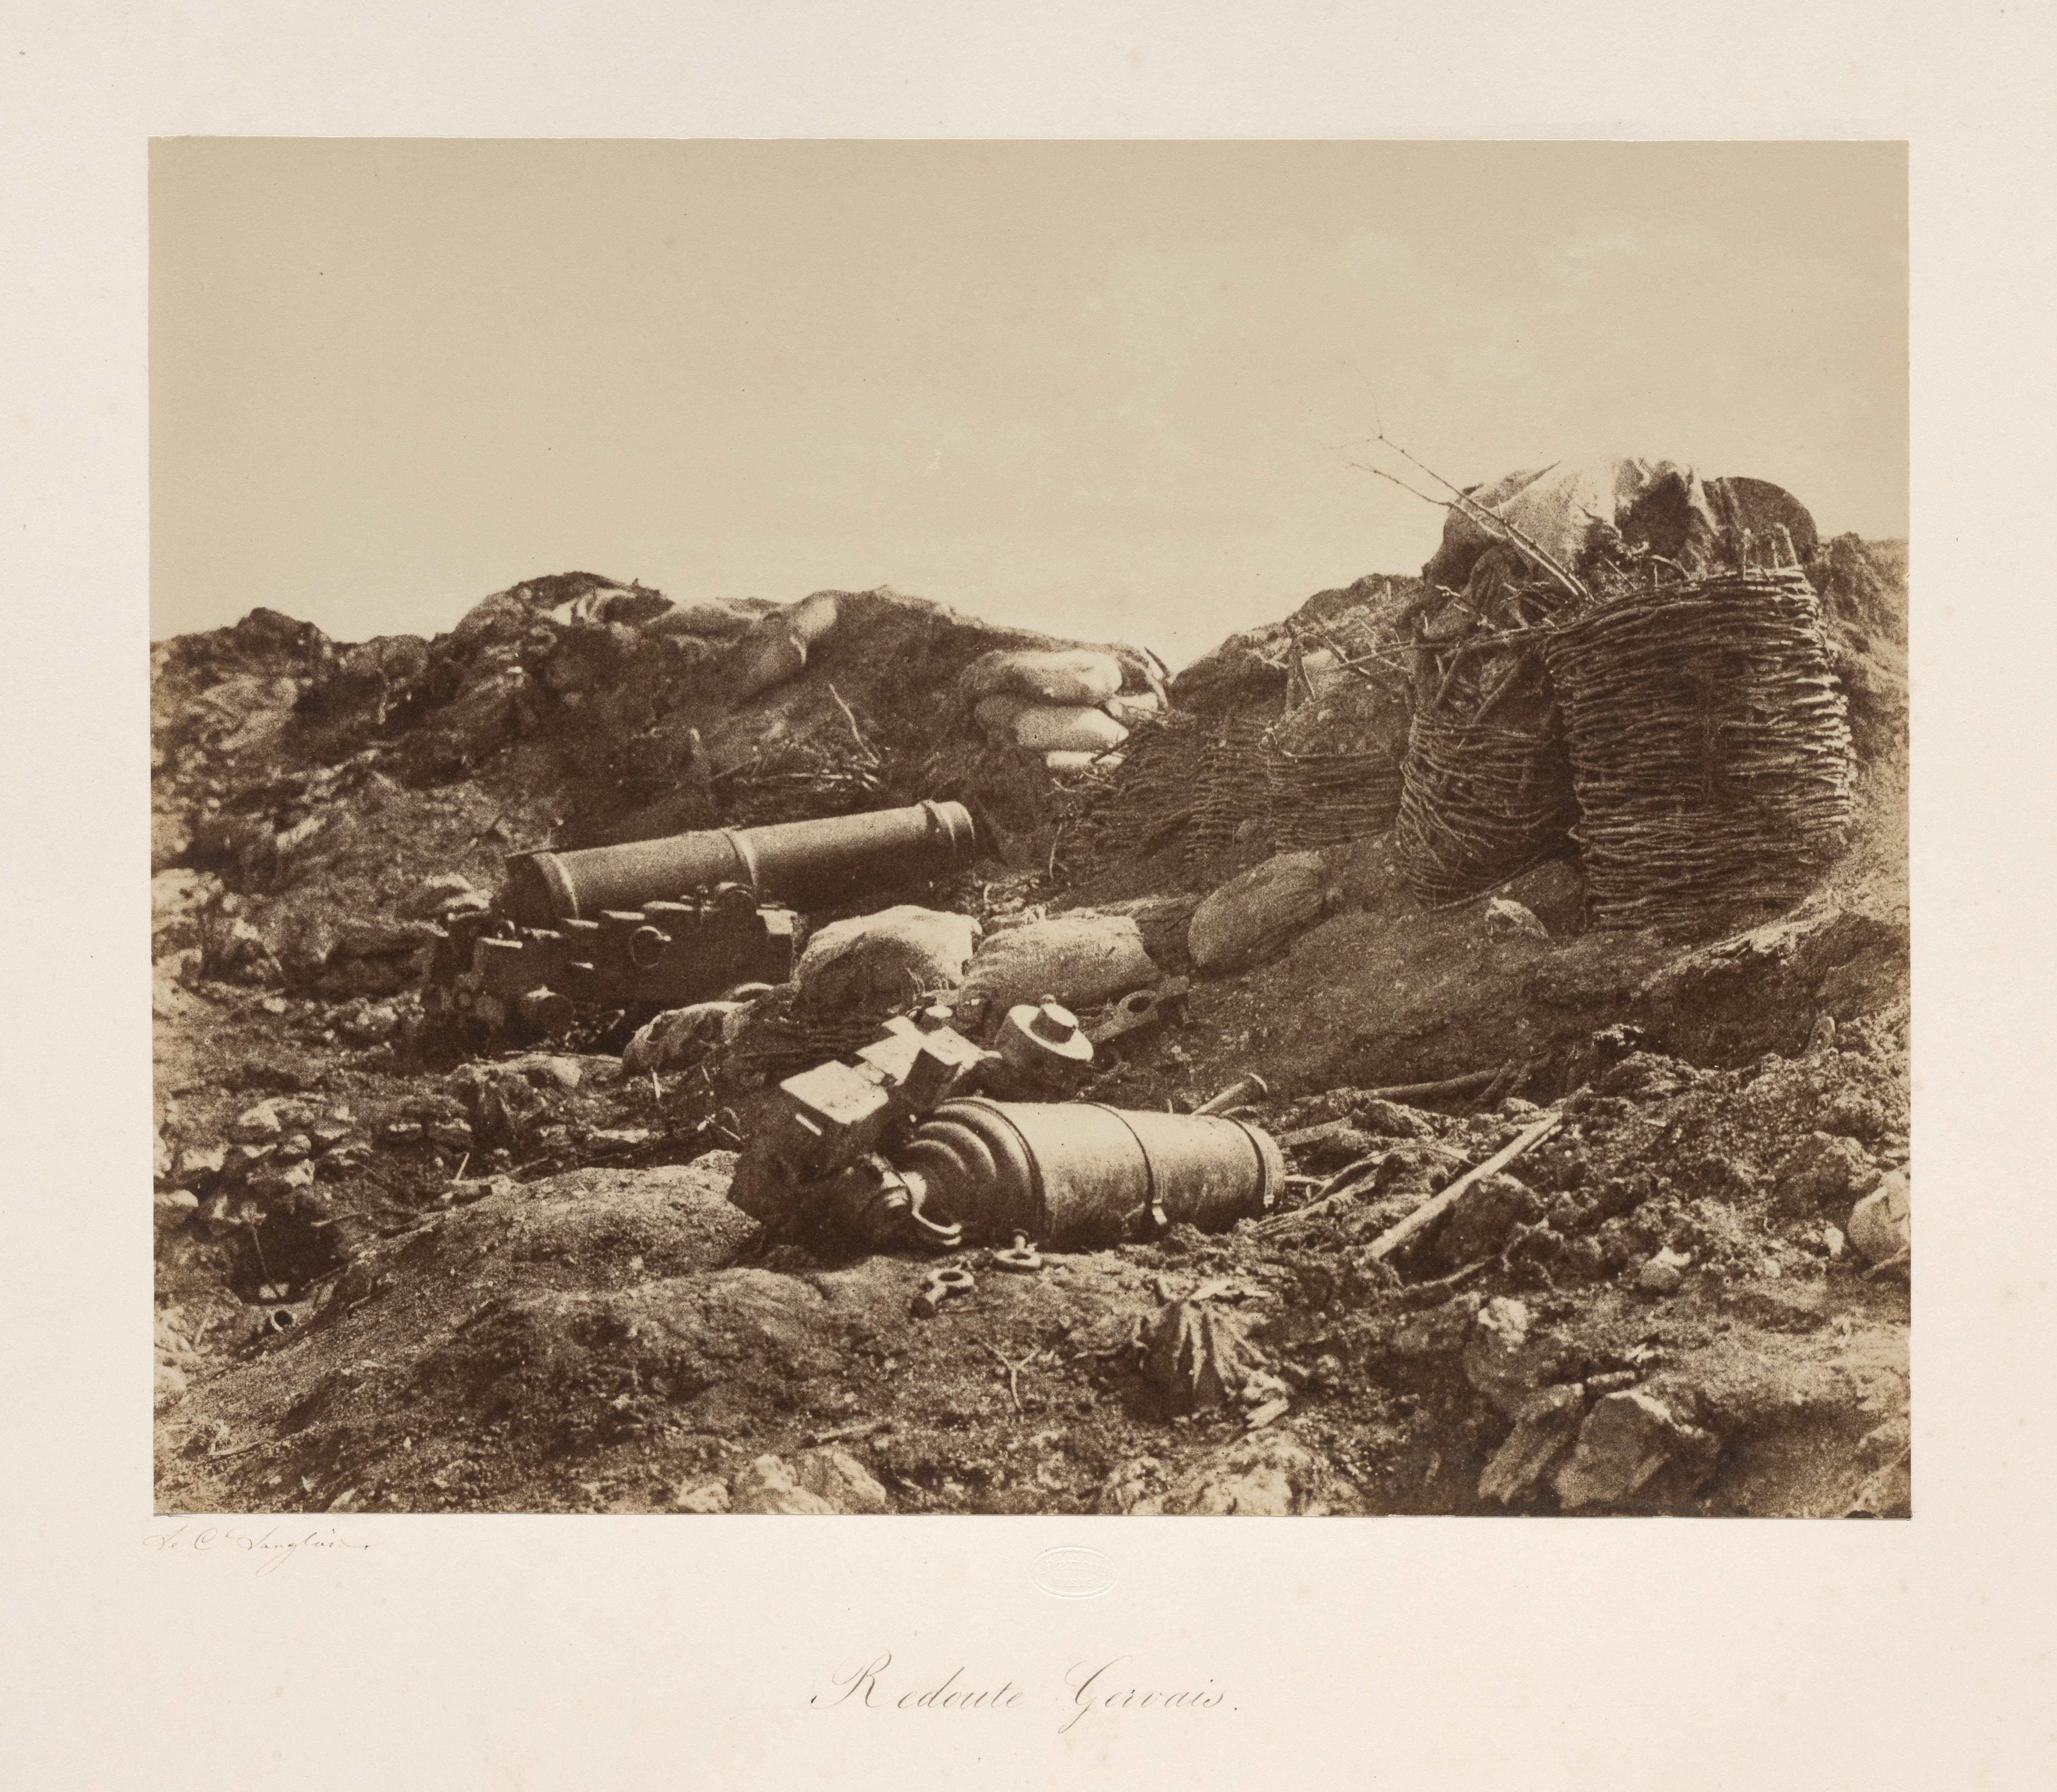 The crimean war, broken cannons on the ground.